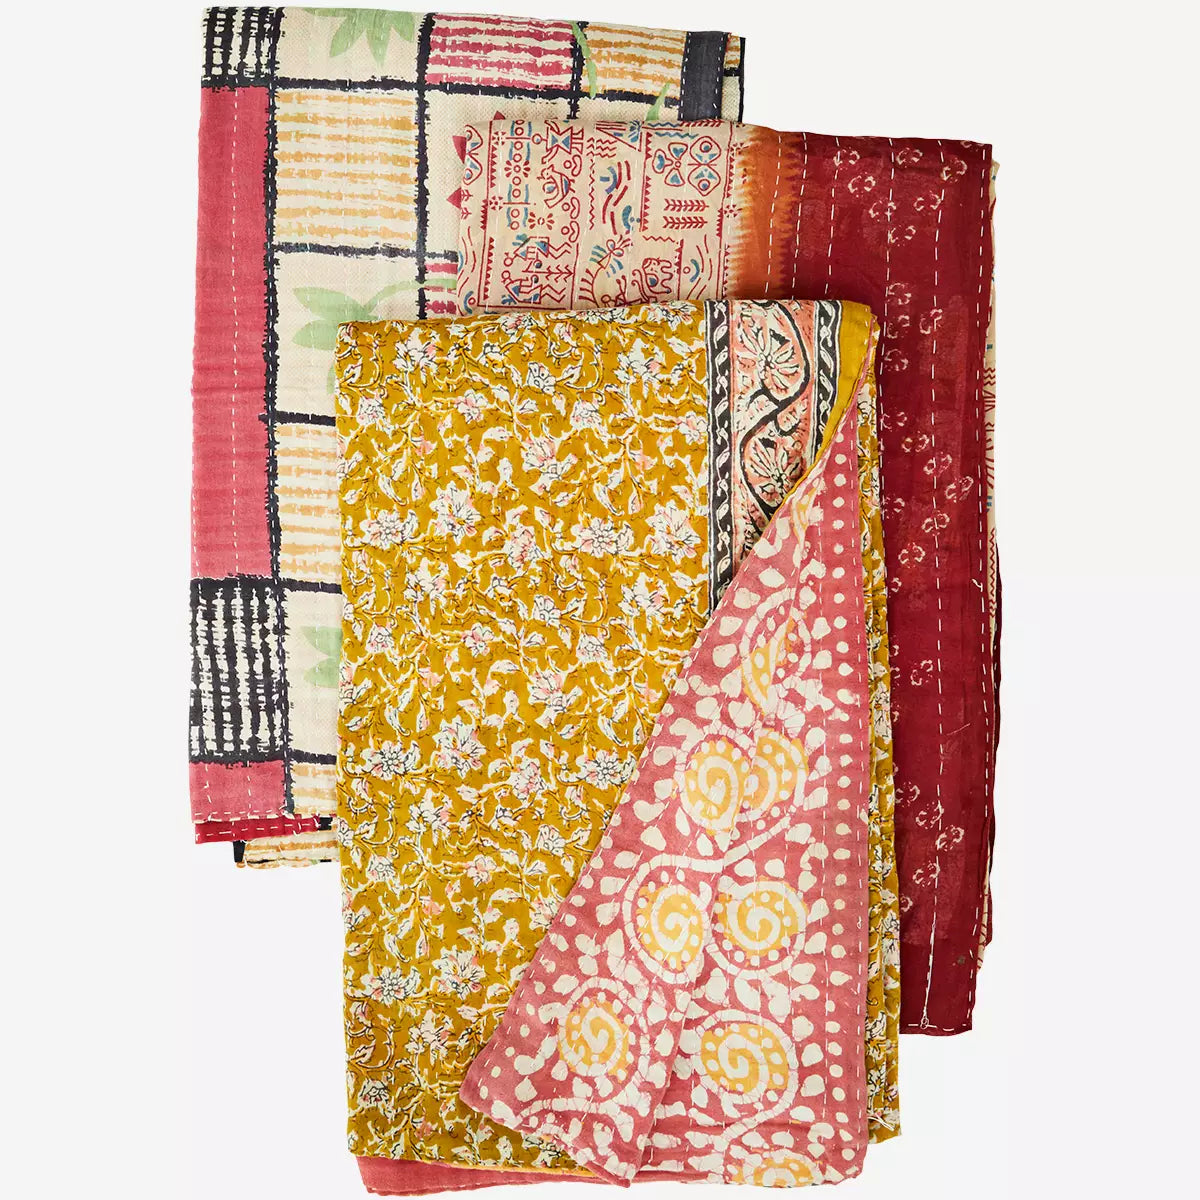 Unique Recycled Kantha Throws